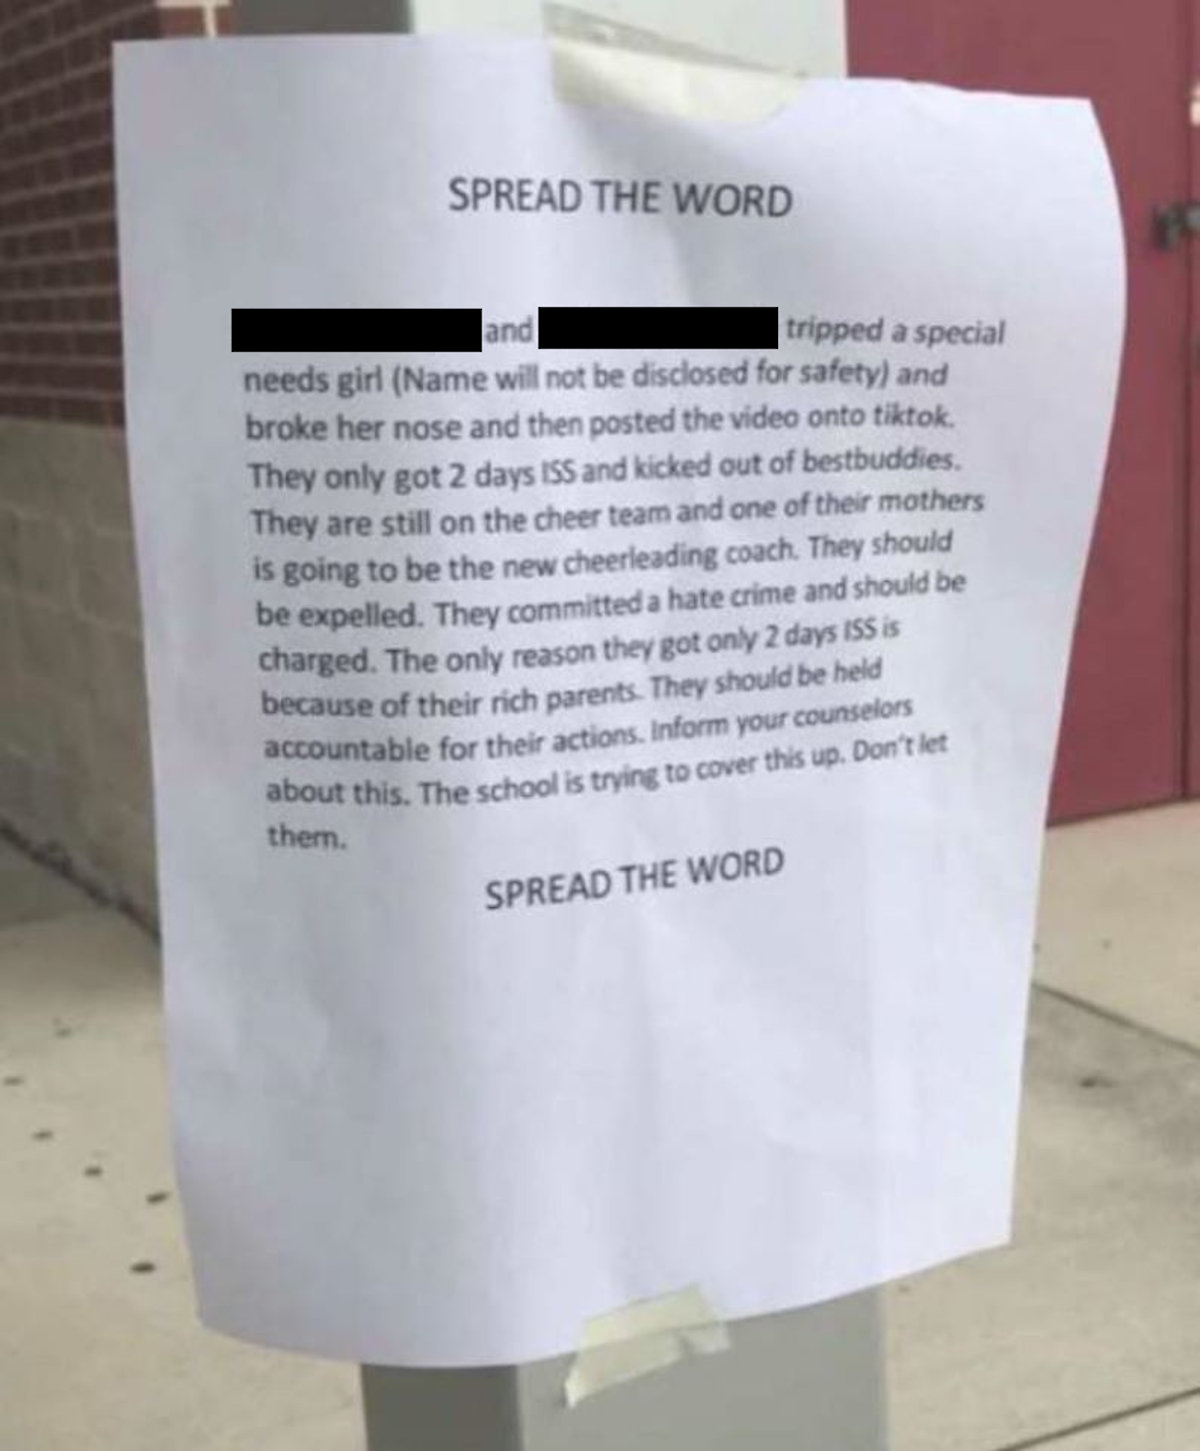 The message posted around Seabreeze High School, asking students to spread the word about the video